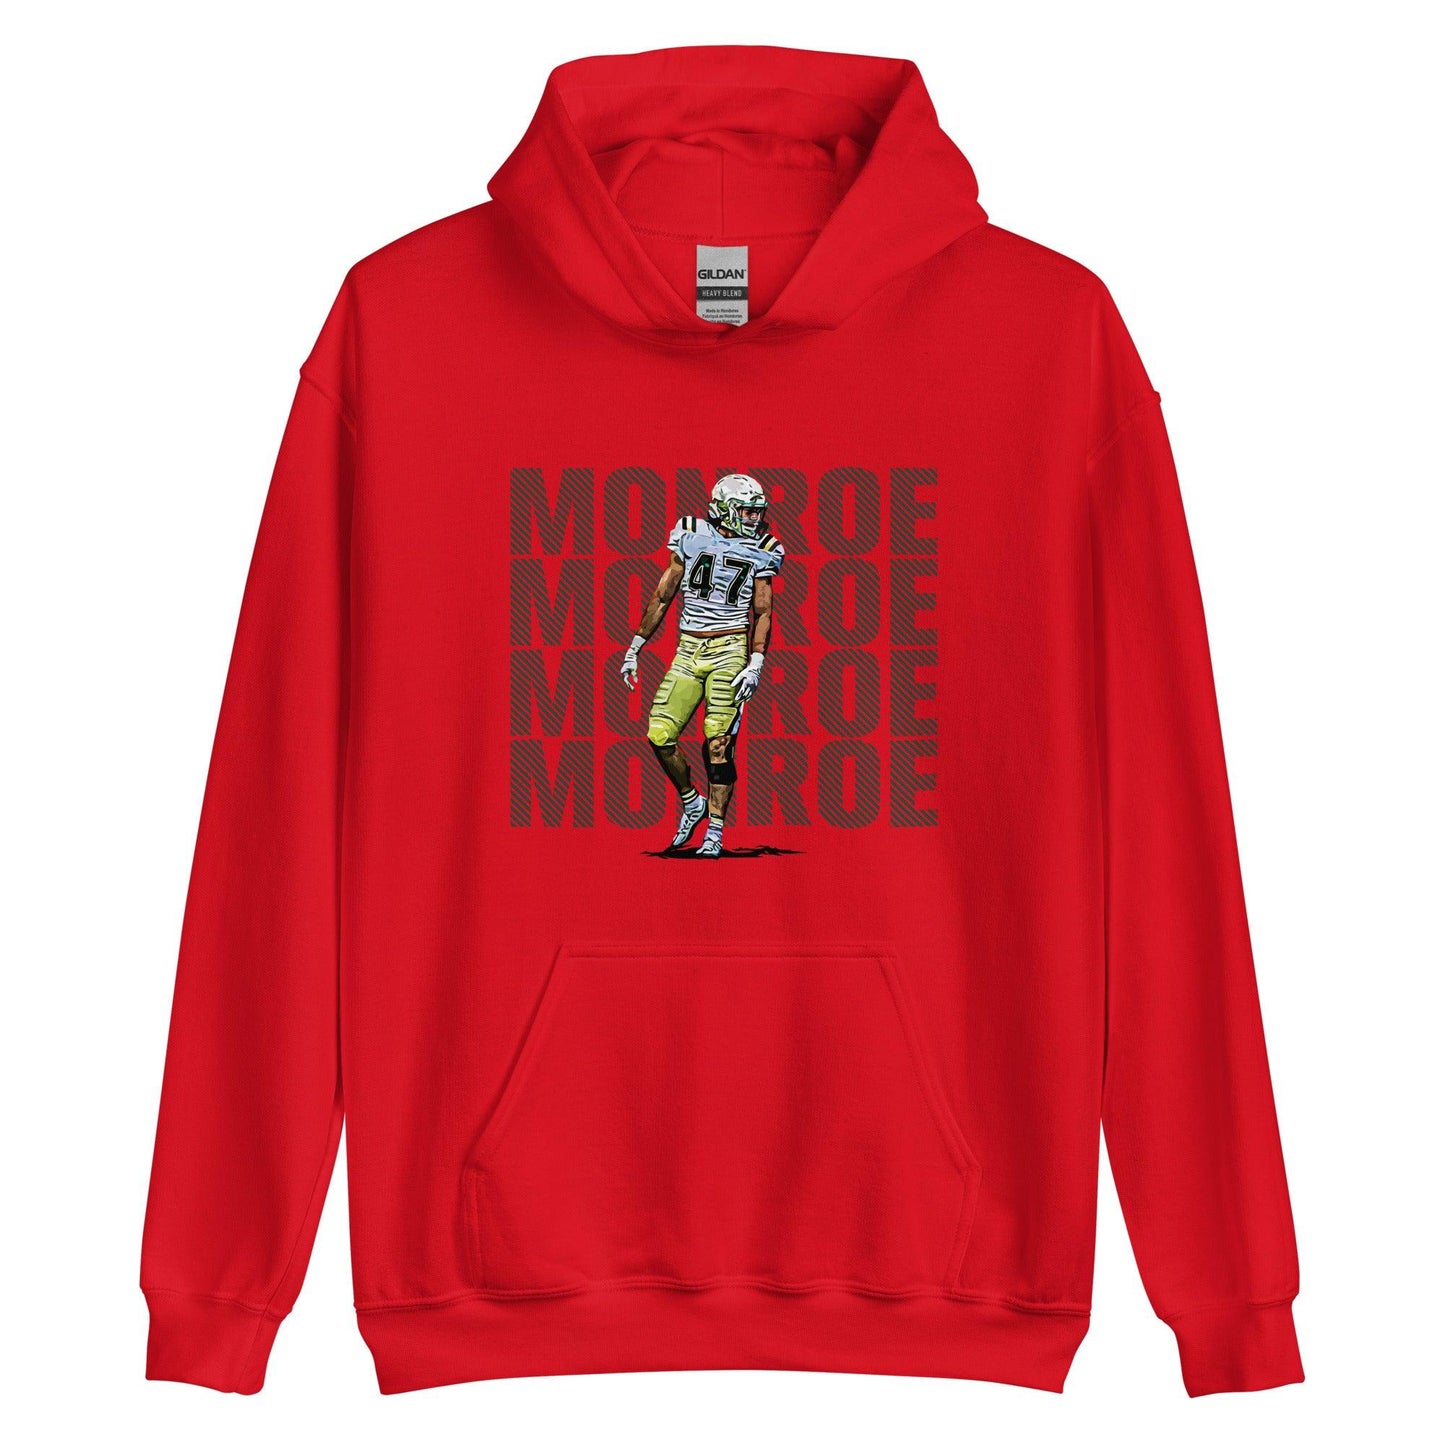 Chase Monroe "Gameday" Hoodie - Fan Arch